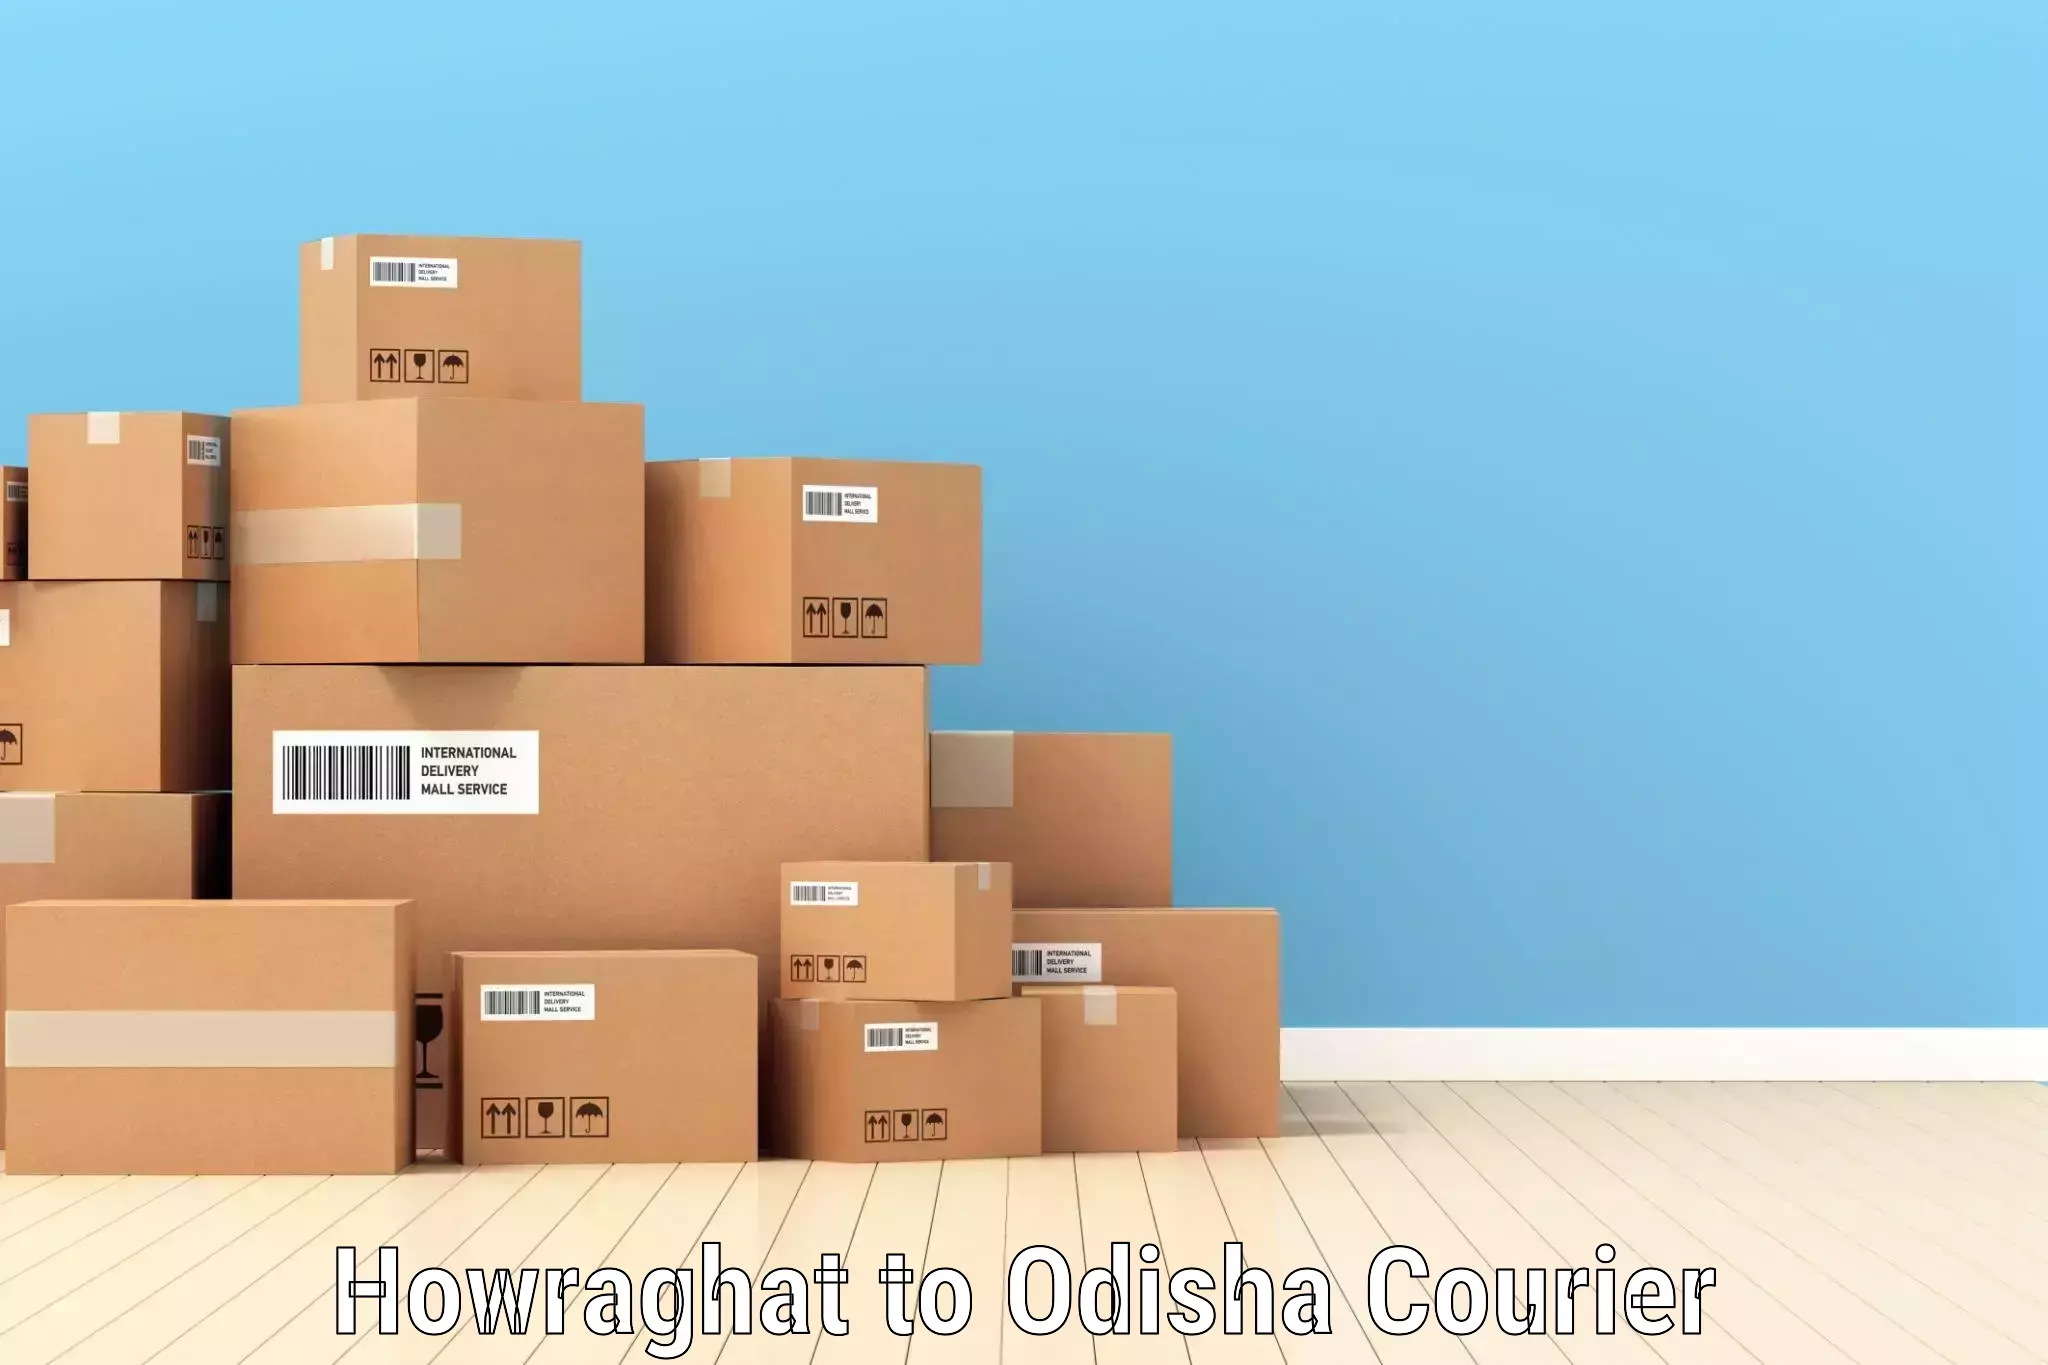 State-of-the-art courier technology Howraghat to Basudebpur